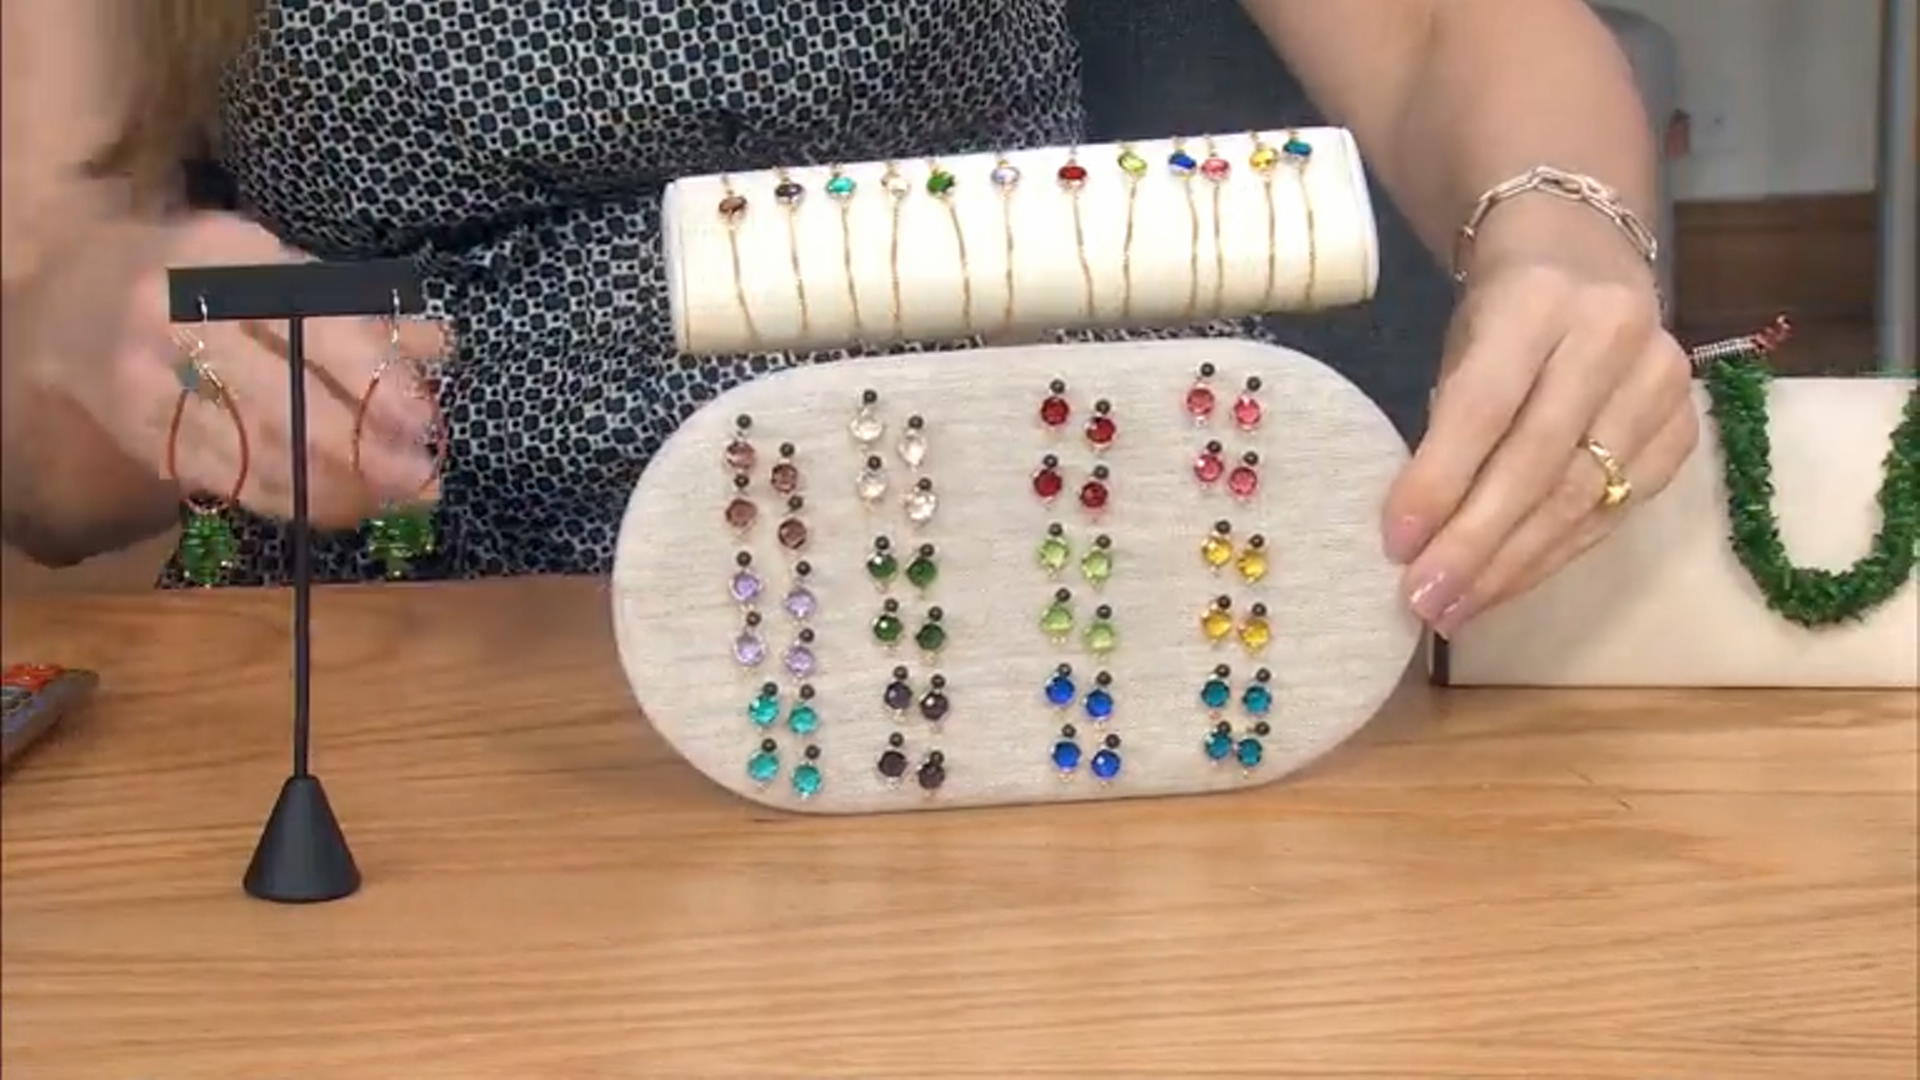 Gold Tone Birthstone Bracelet and Necklace Kit Video Thumbnail